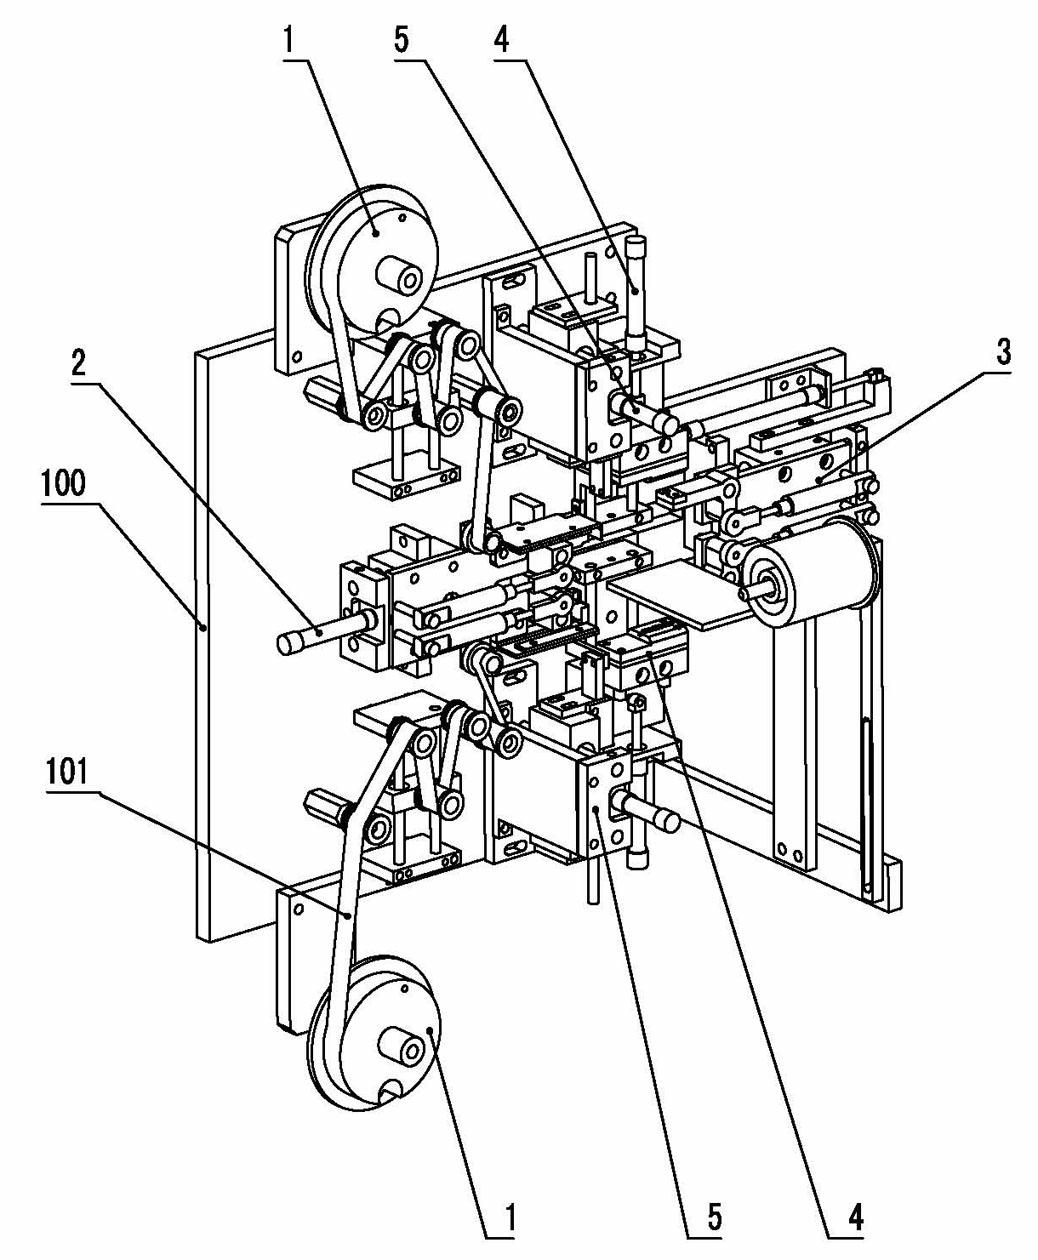 Paper sticking device of battery machine and battery machine adopting paper sticking device